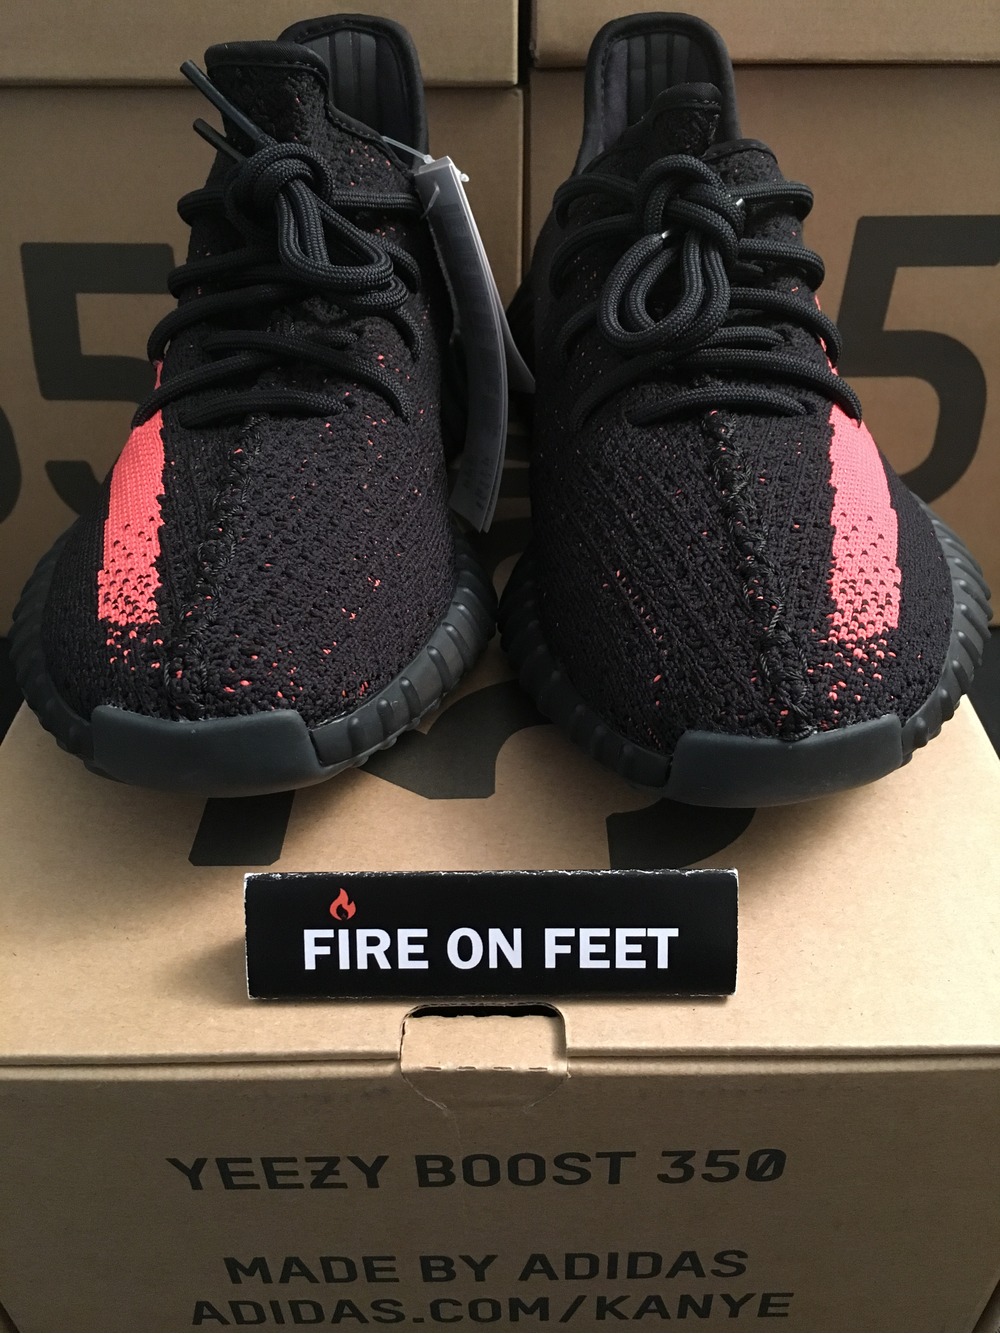 Adidas YEEZY BOOST 350 v2 CP 9652 'BRED' Size US 8.5